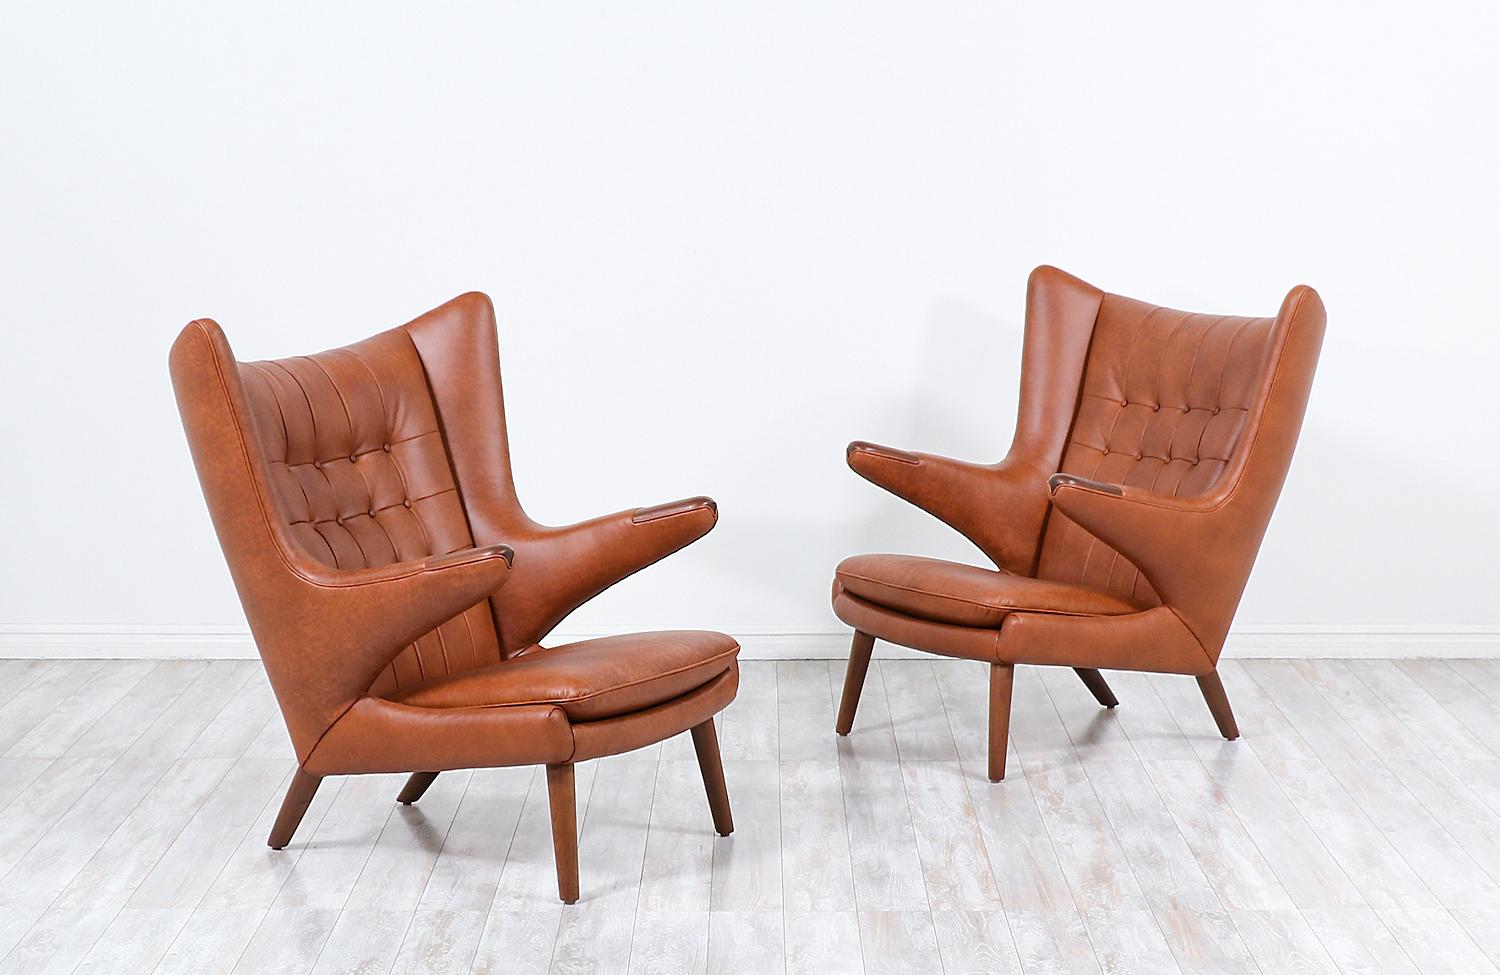 These iconic “Papa Bear” lounge chairs were designed by Hans J. Wegner for the famous Danish workshop of A.P. Stolen in 1951. Originally named the AP-19, this model acquired the name “Papa Bear” when a journalist claimed that the chair looked like a